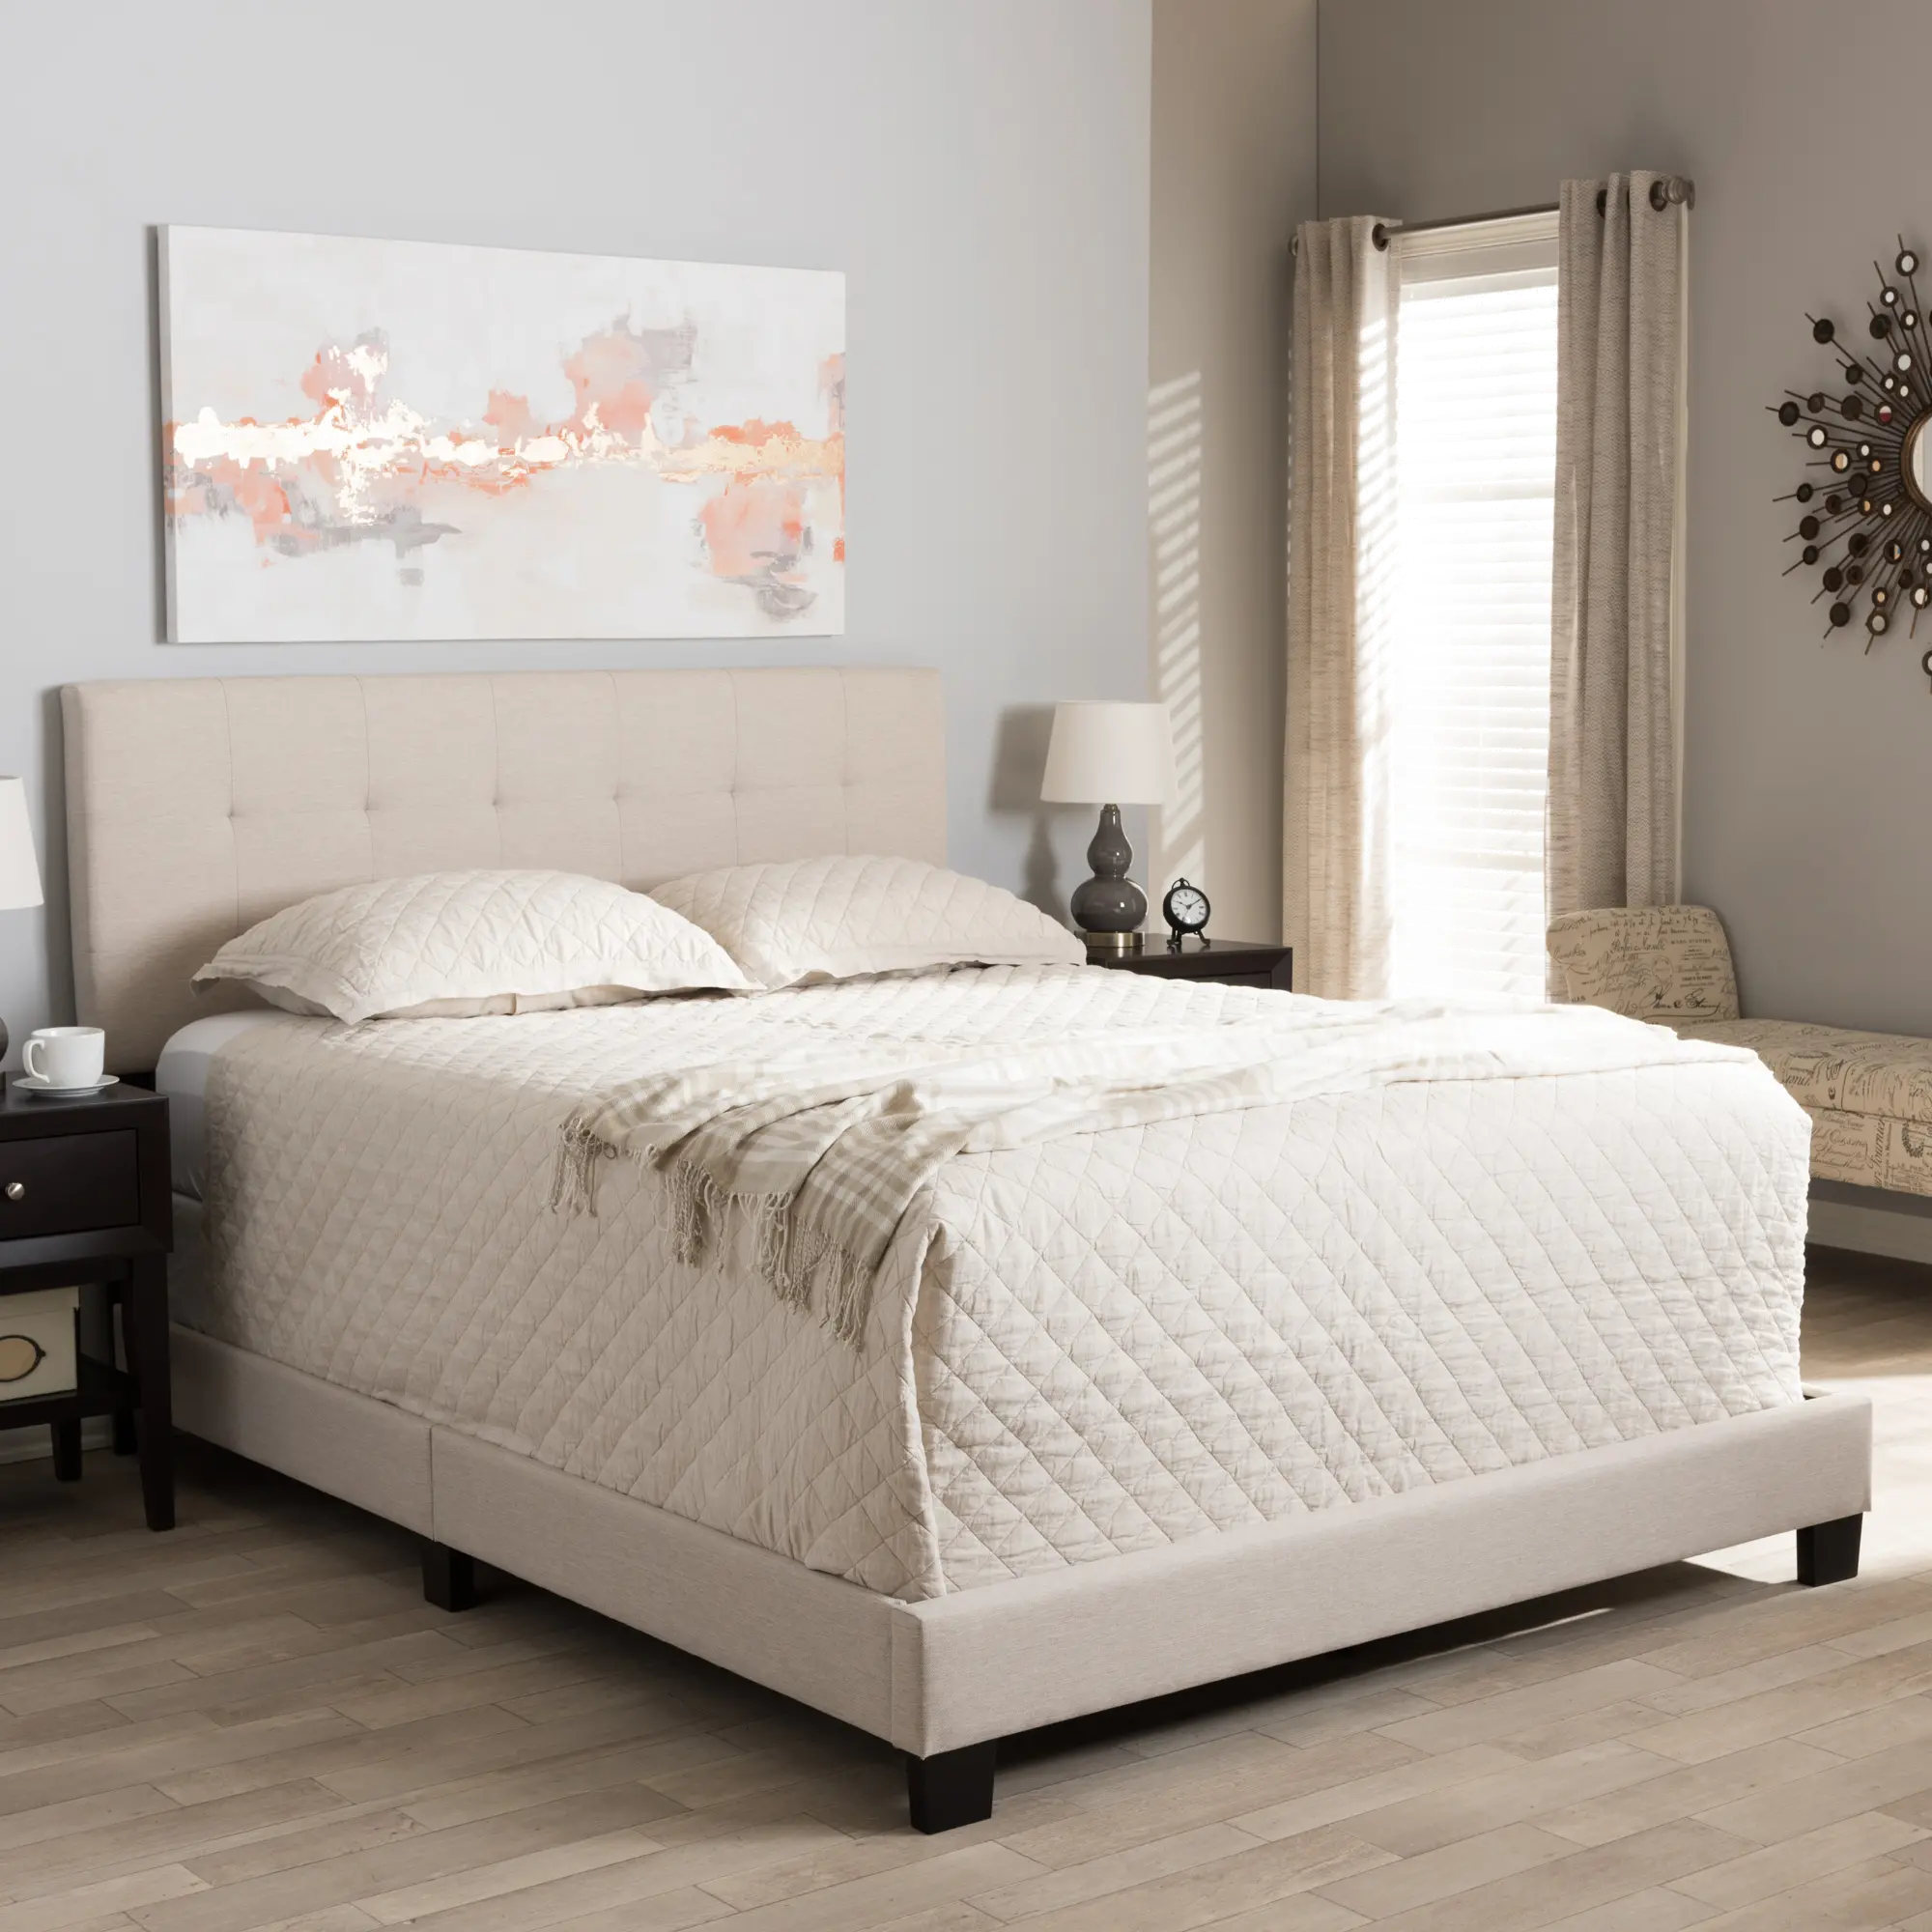 131-7315-RCW Contemporary Beige King Upholstered Bed - Brookfie sku 131-7315-RCW